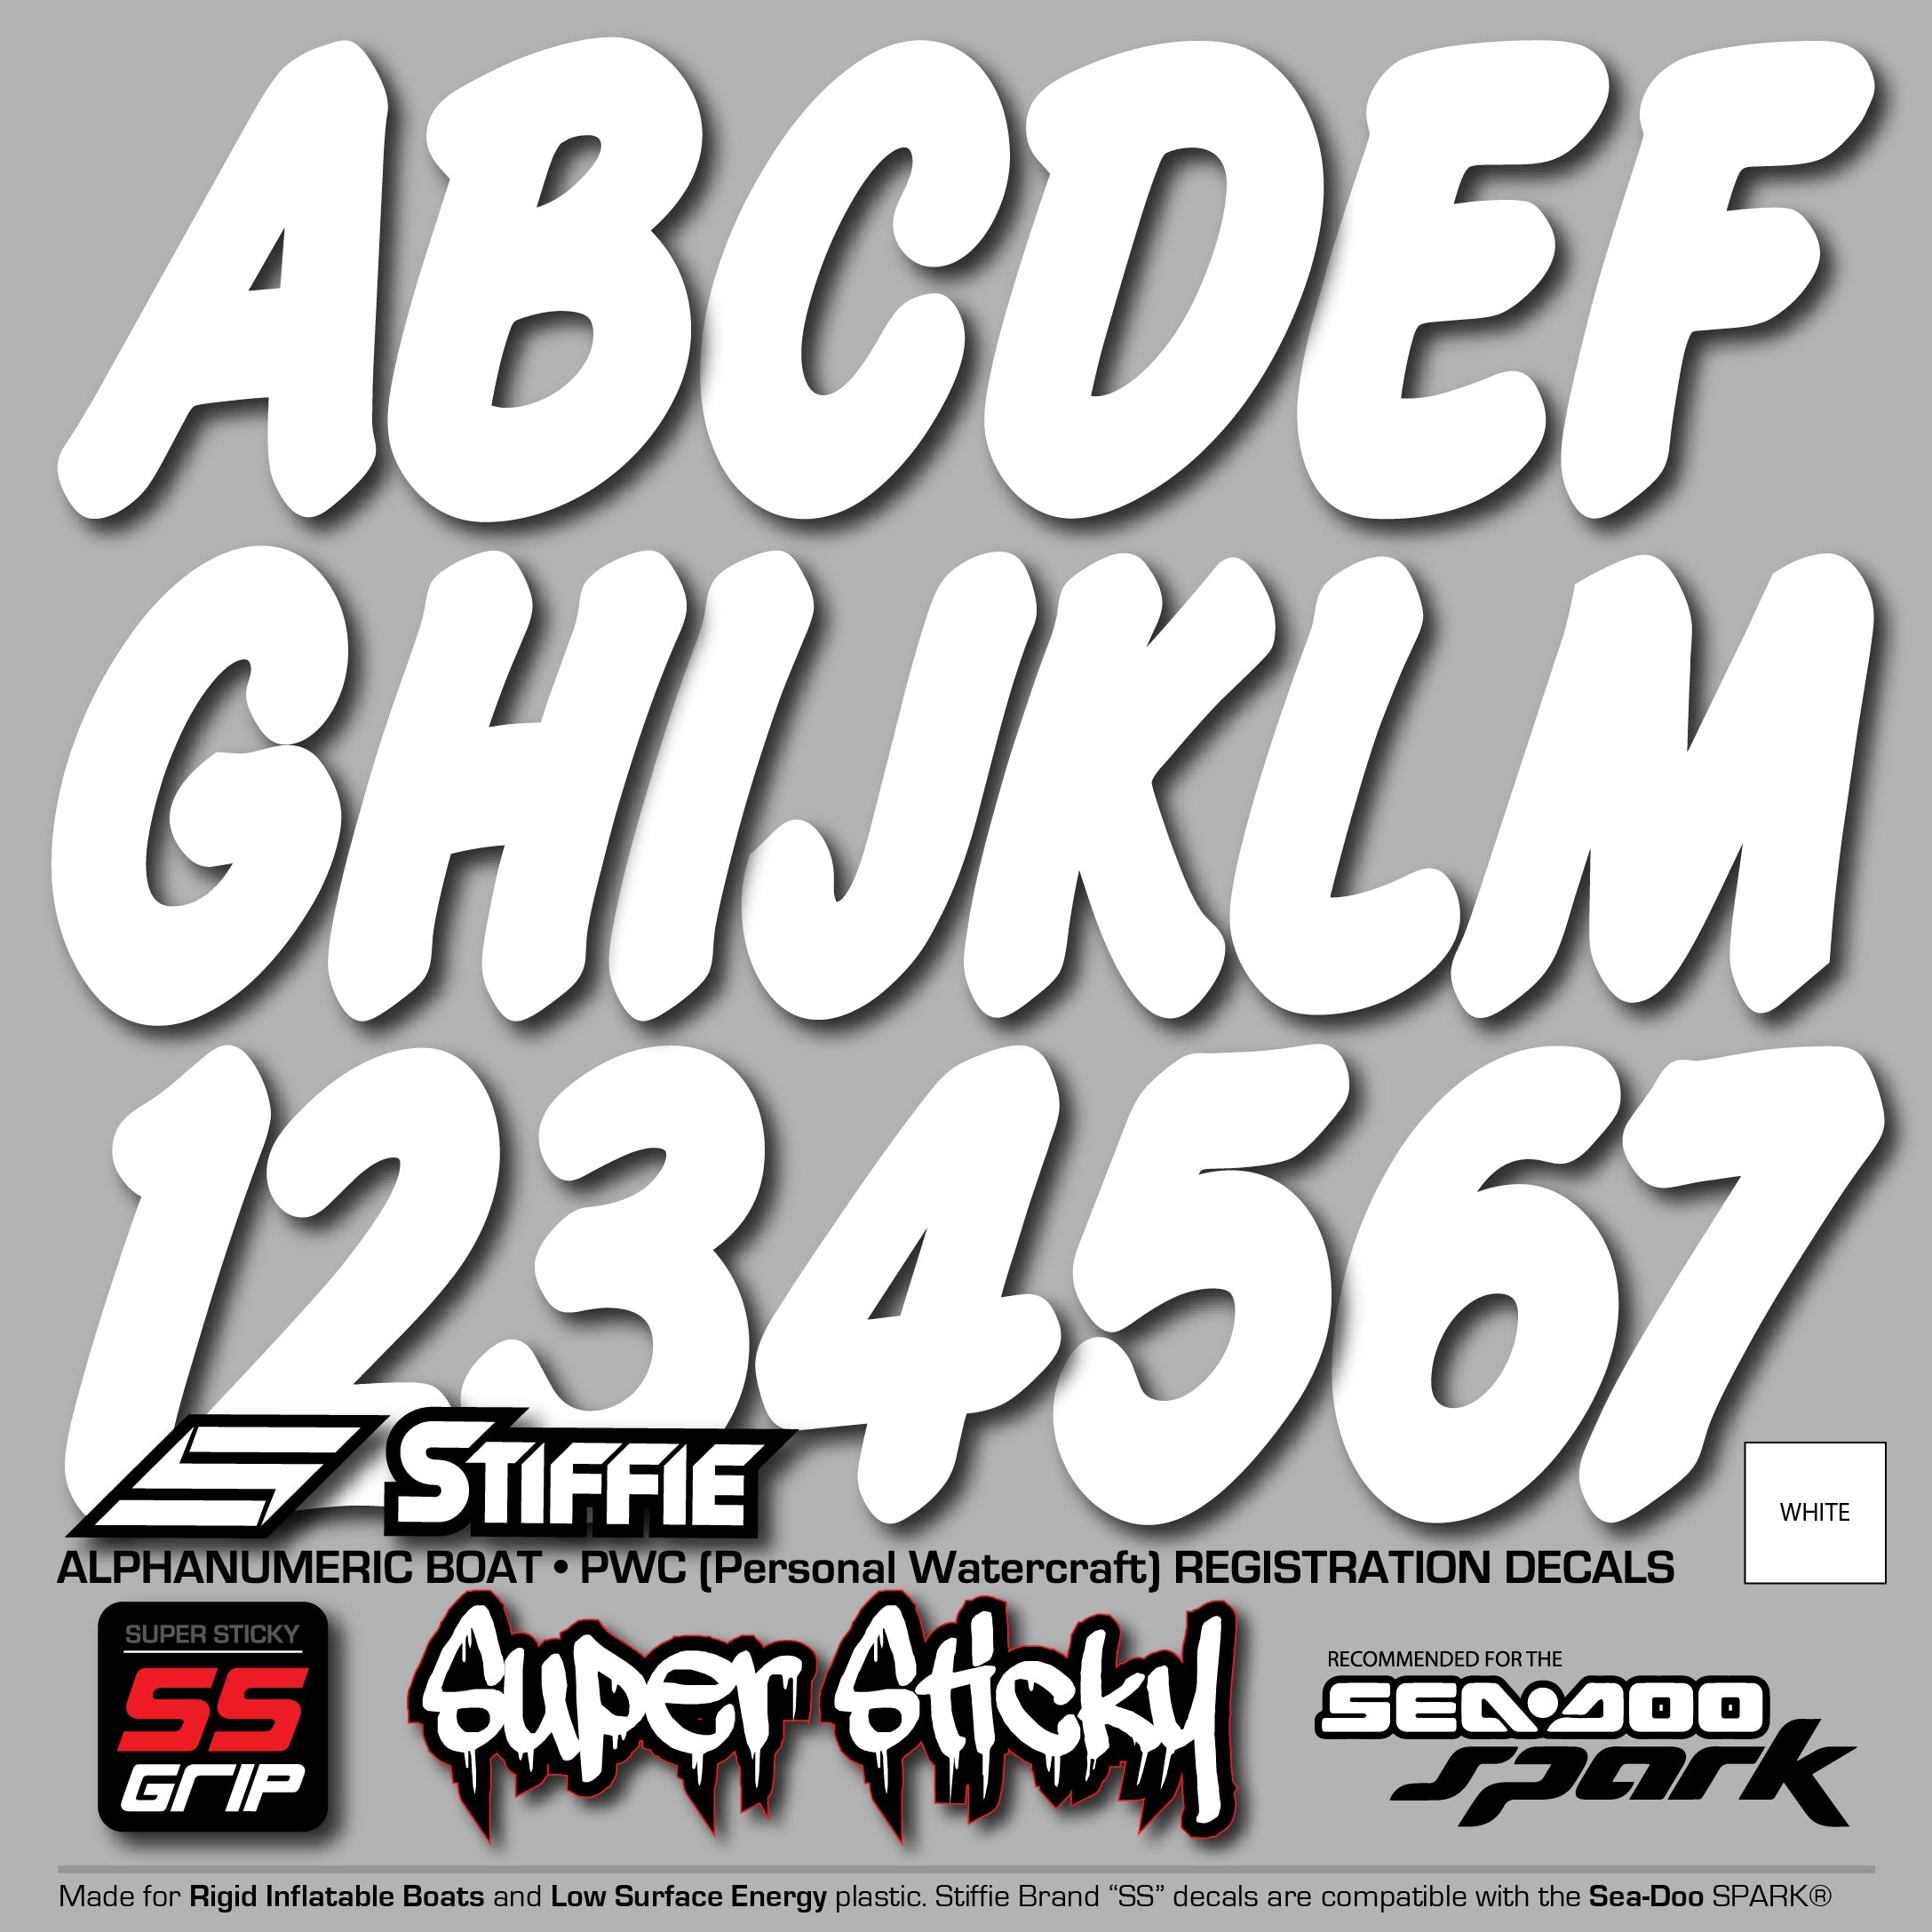 Stiffie Whip-One White Super Sticky 3" Alpha Numeric Registration Identification Numbers Stickers Decals for Sea-Doo Spark, Inflatable Boats, Ribs, Hypalon/PVC, PWC and Boats